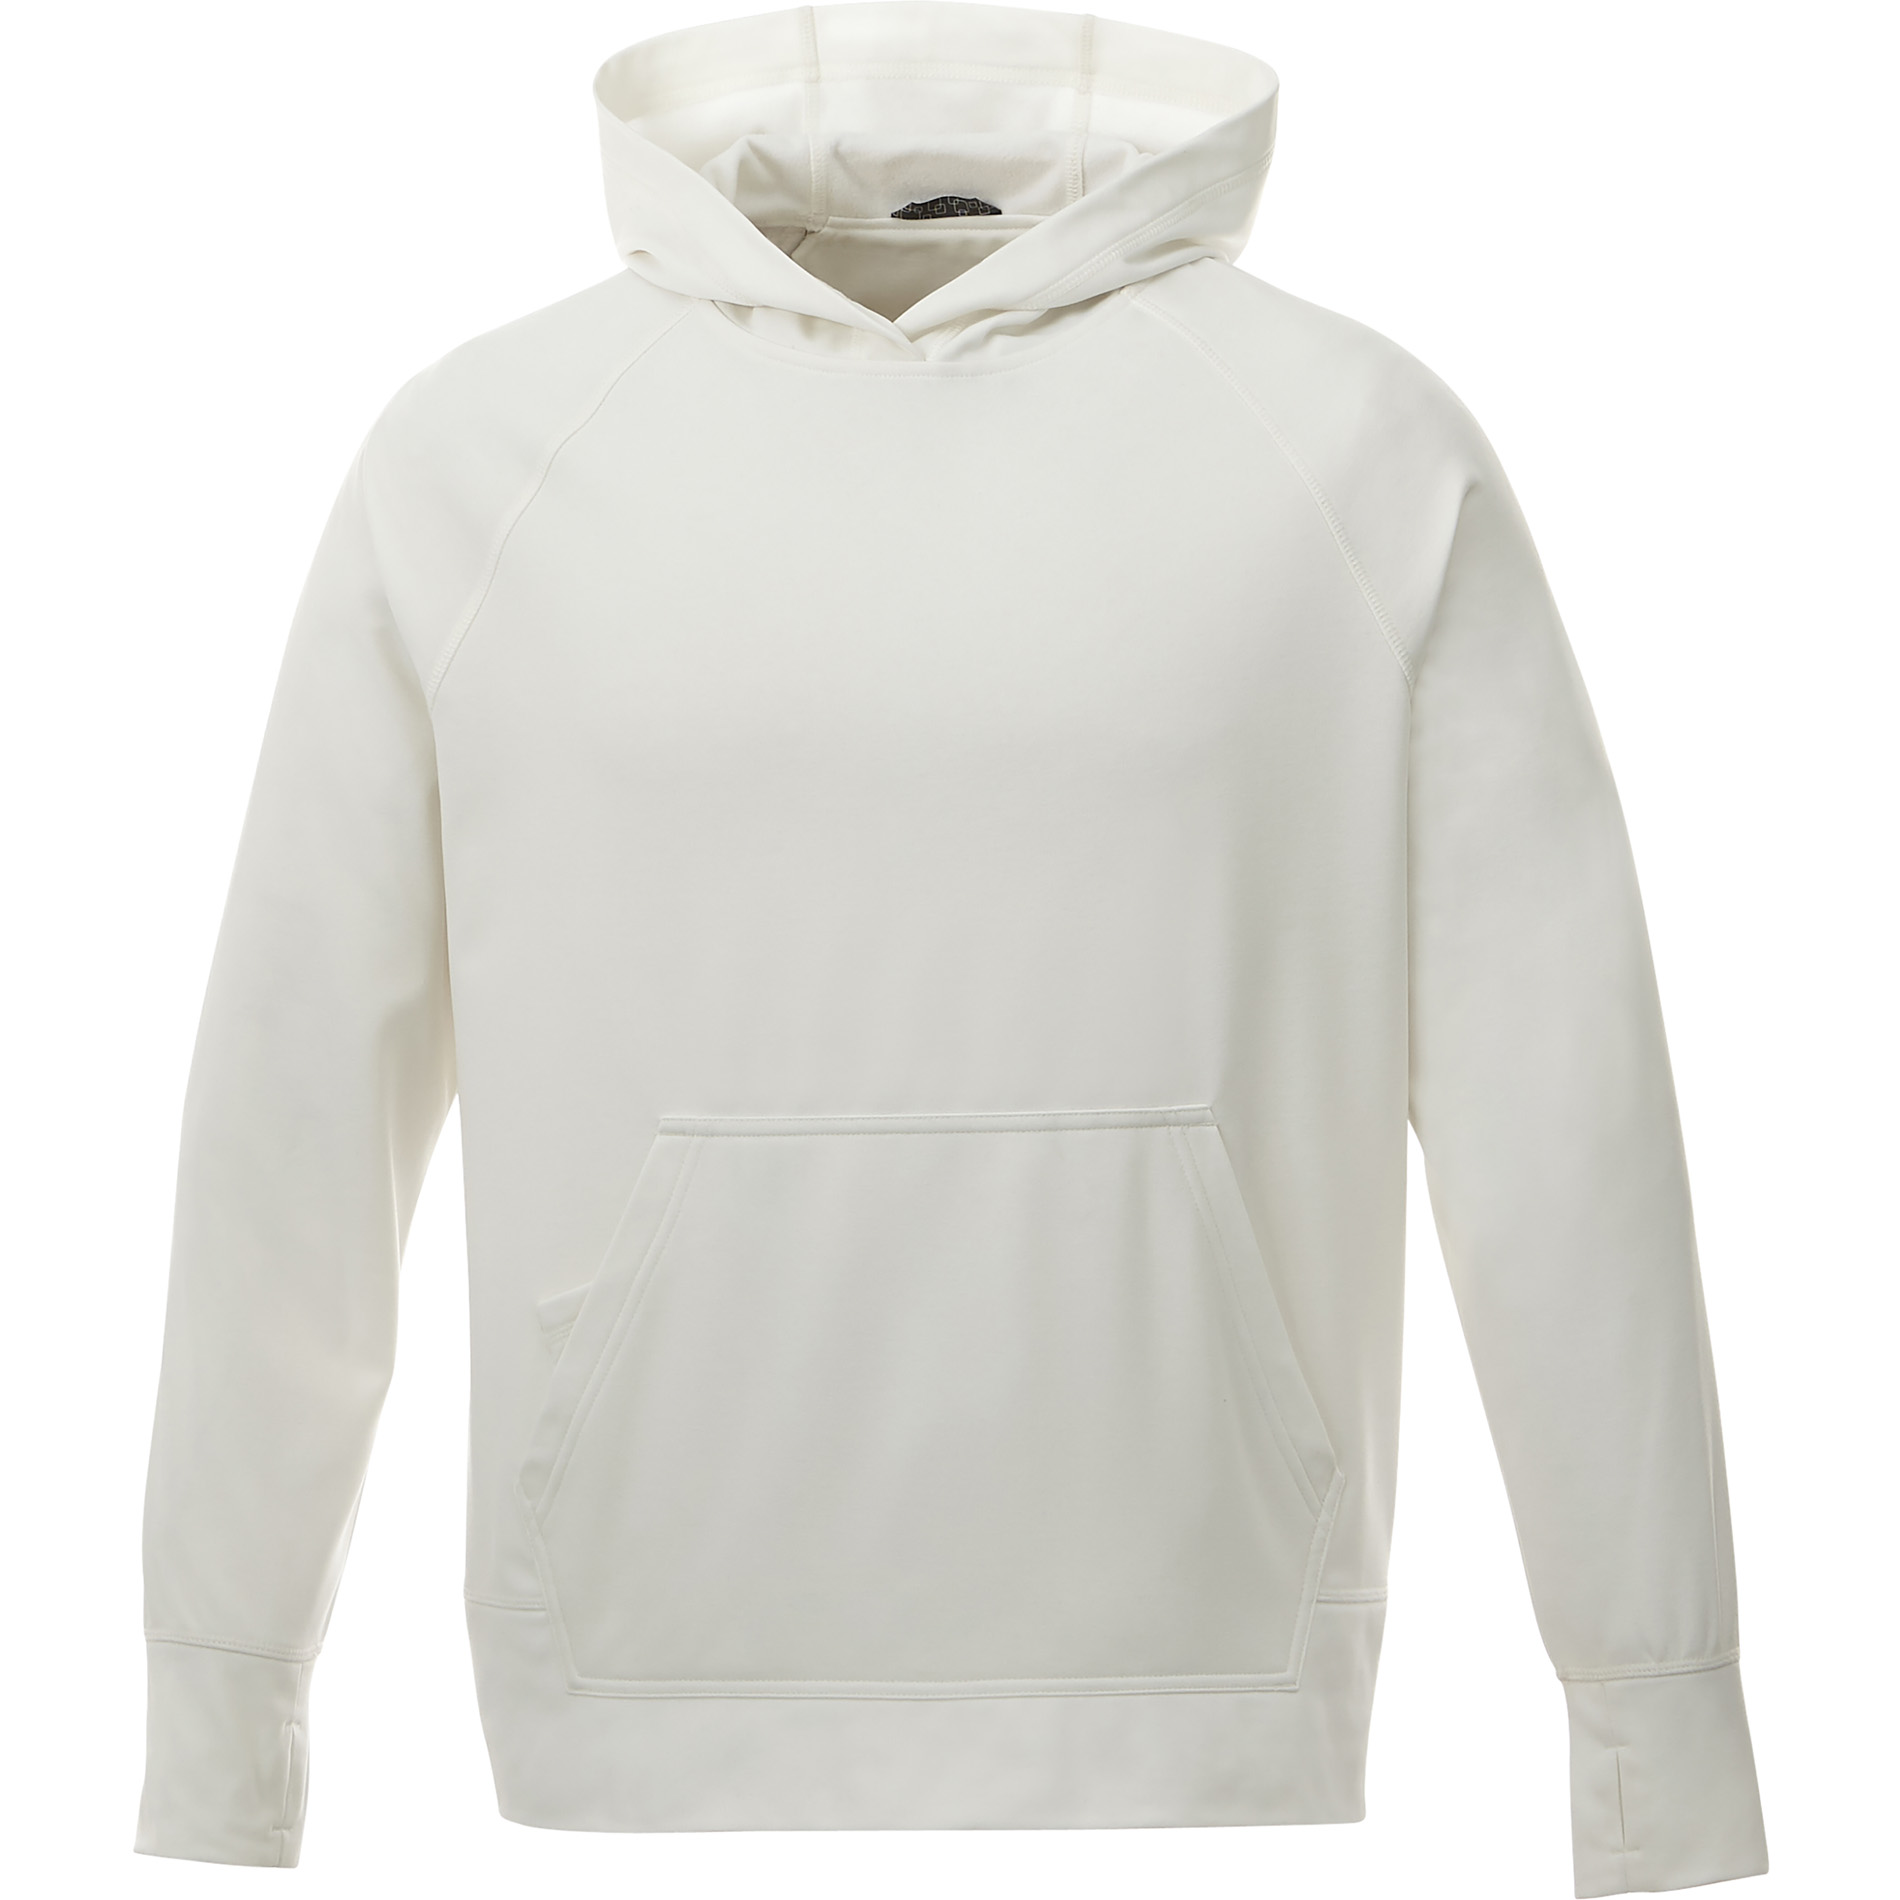 Trimark TM18214 - M-COVILLE Knit Hoody